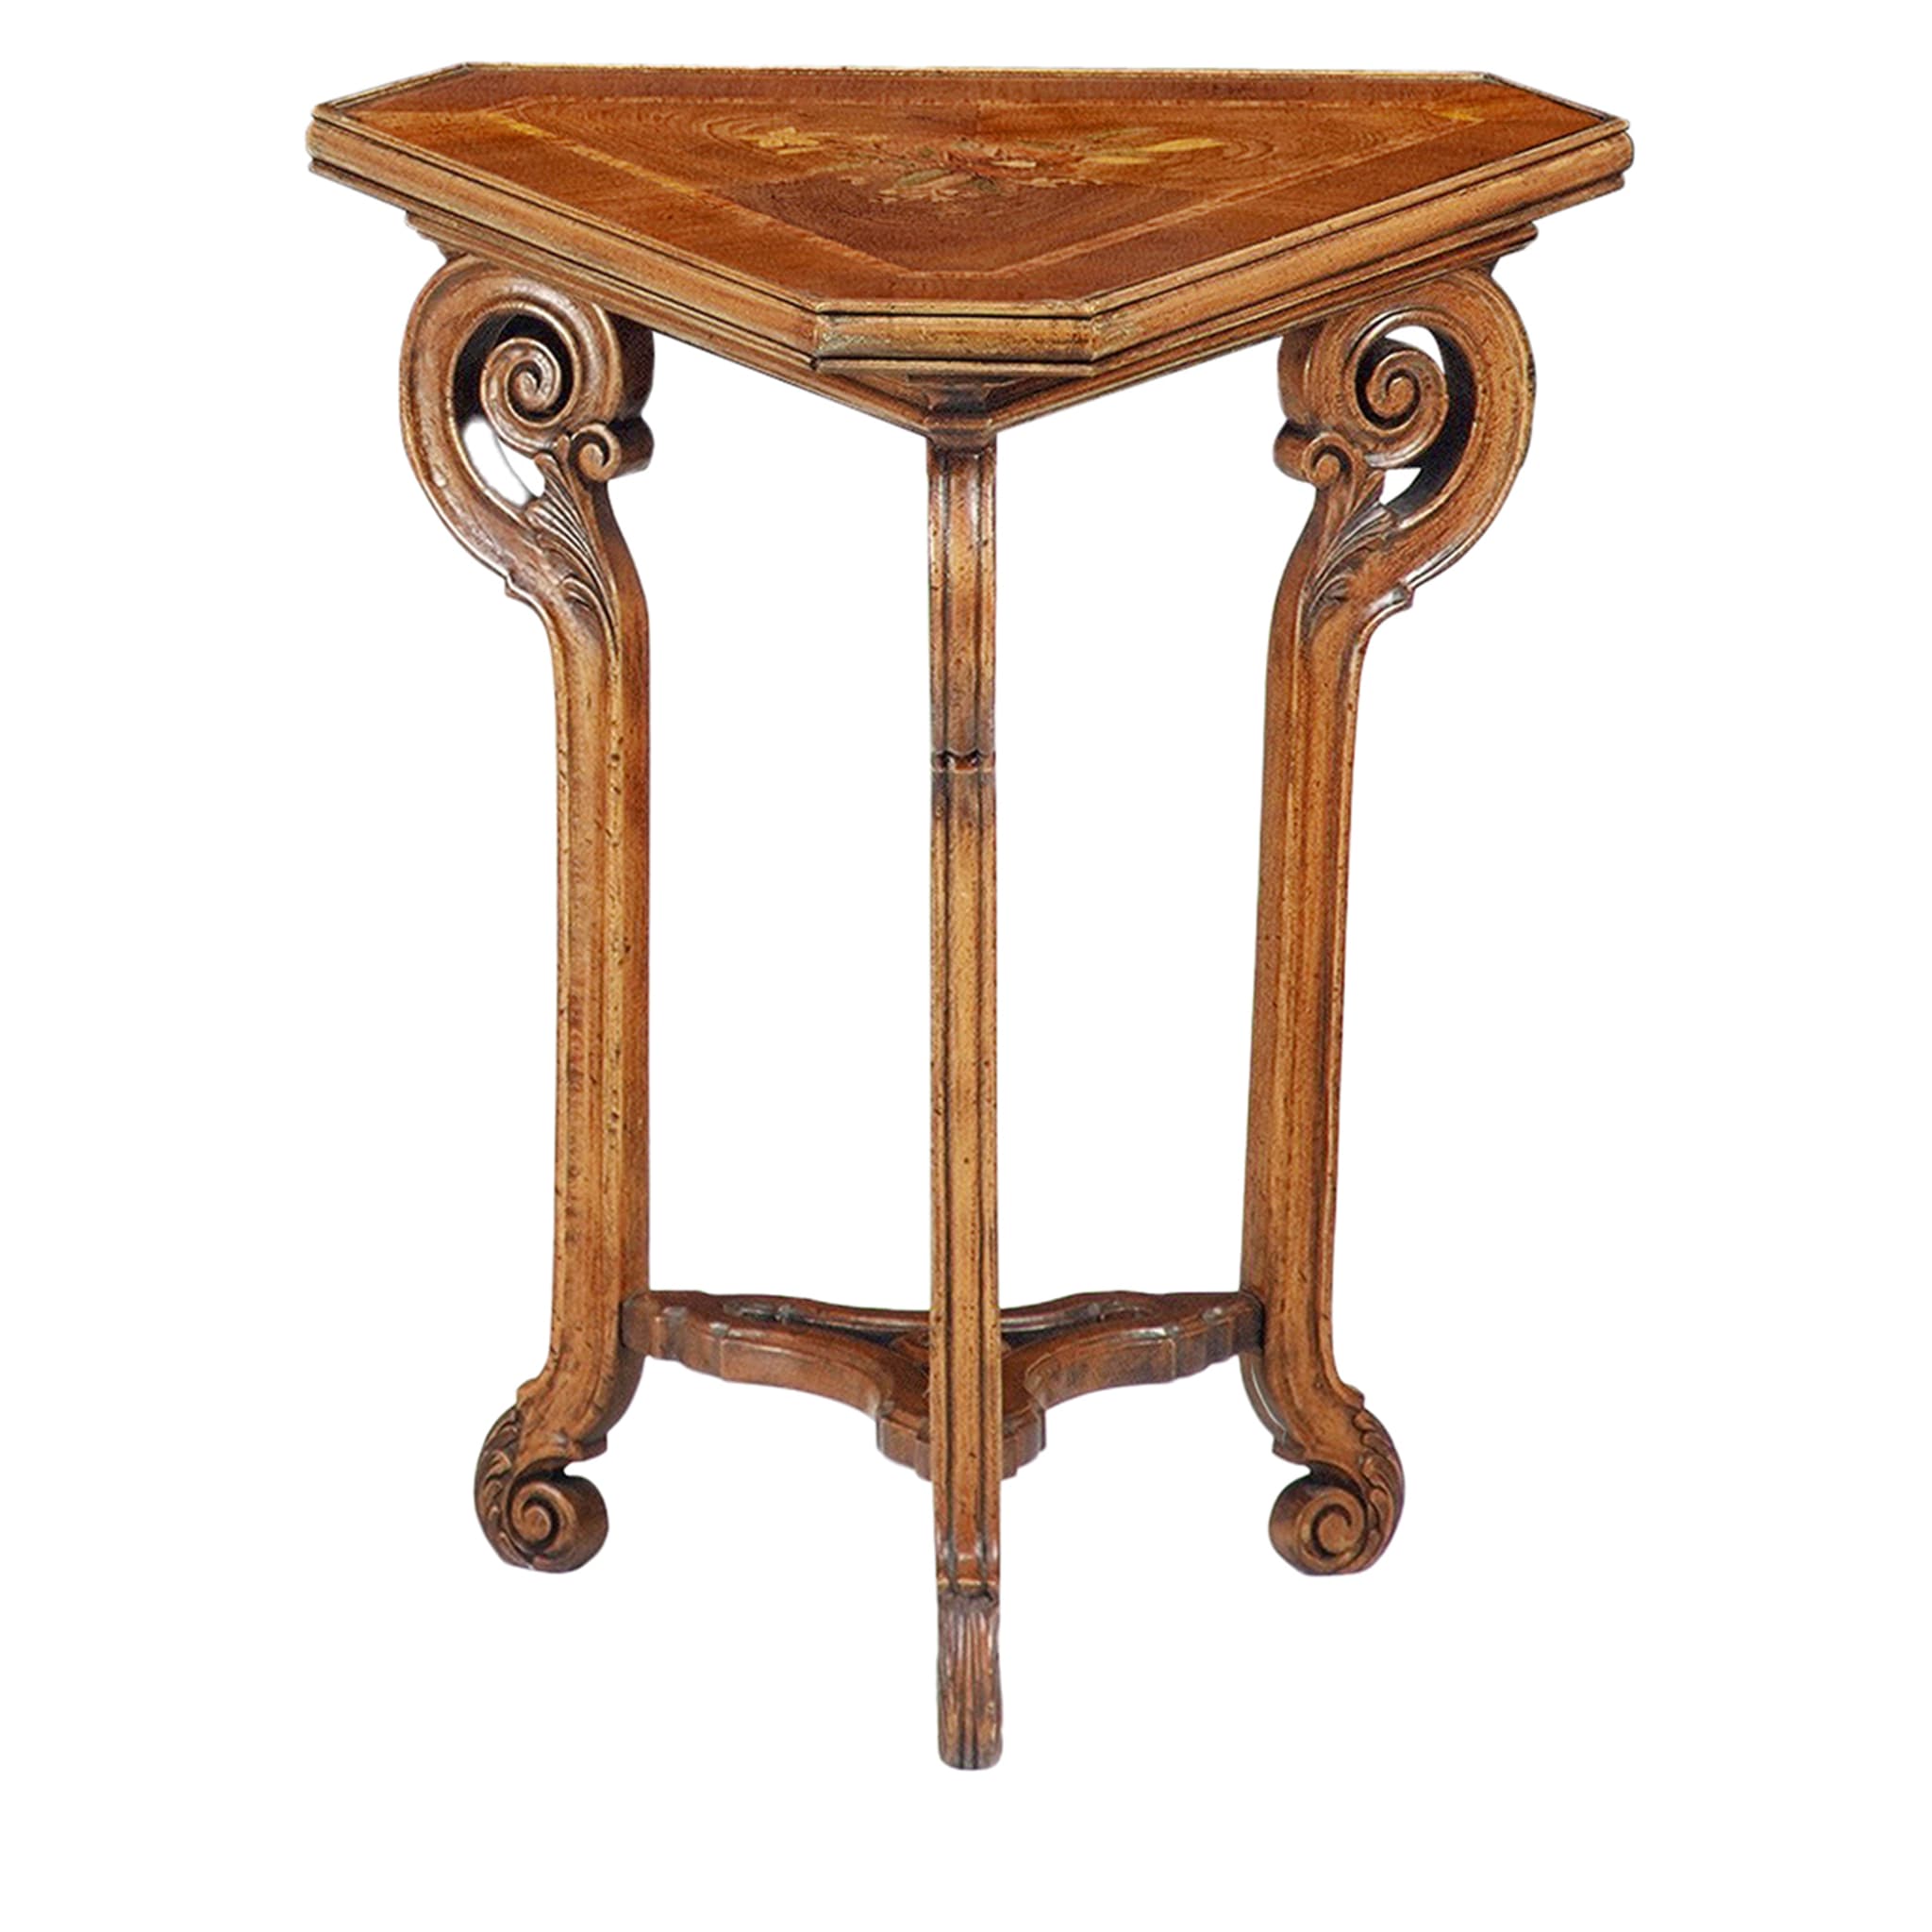 Late 19th-Century English Triangular Accent Table - Main view